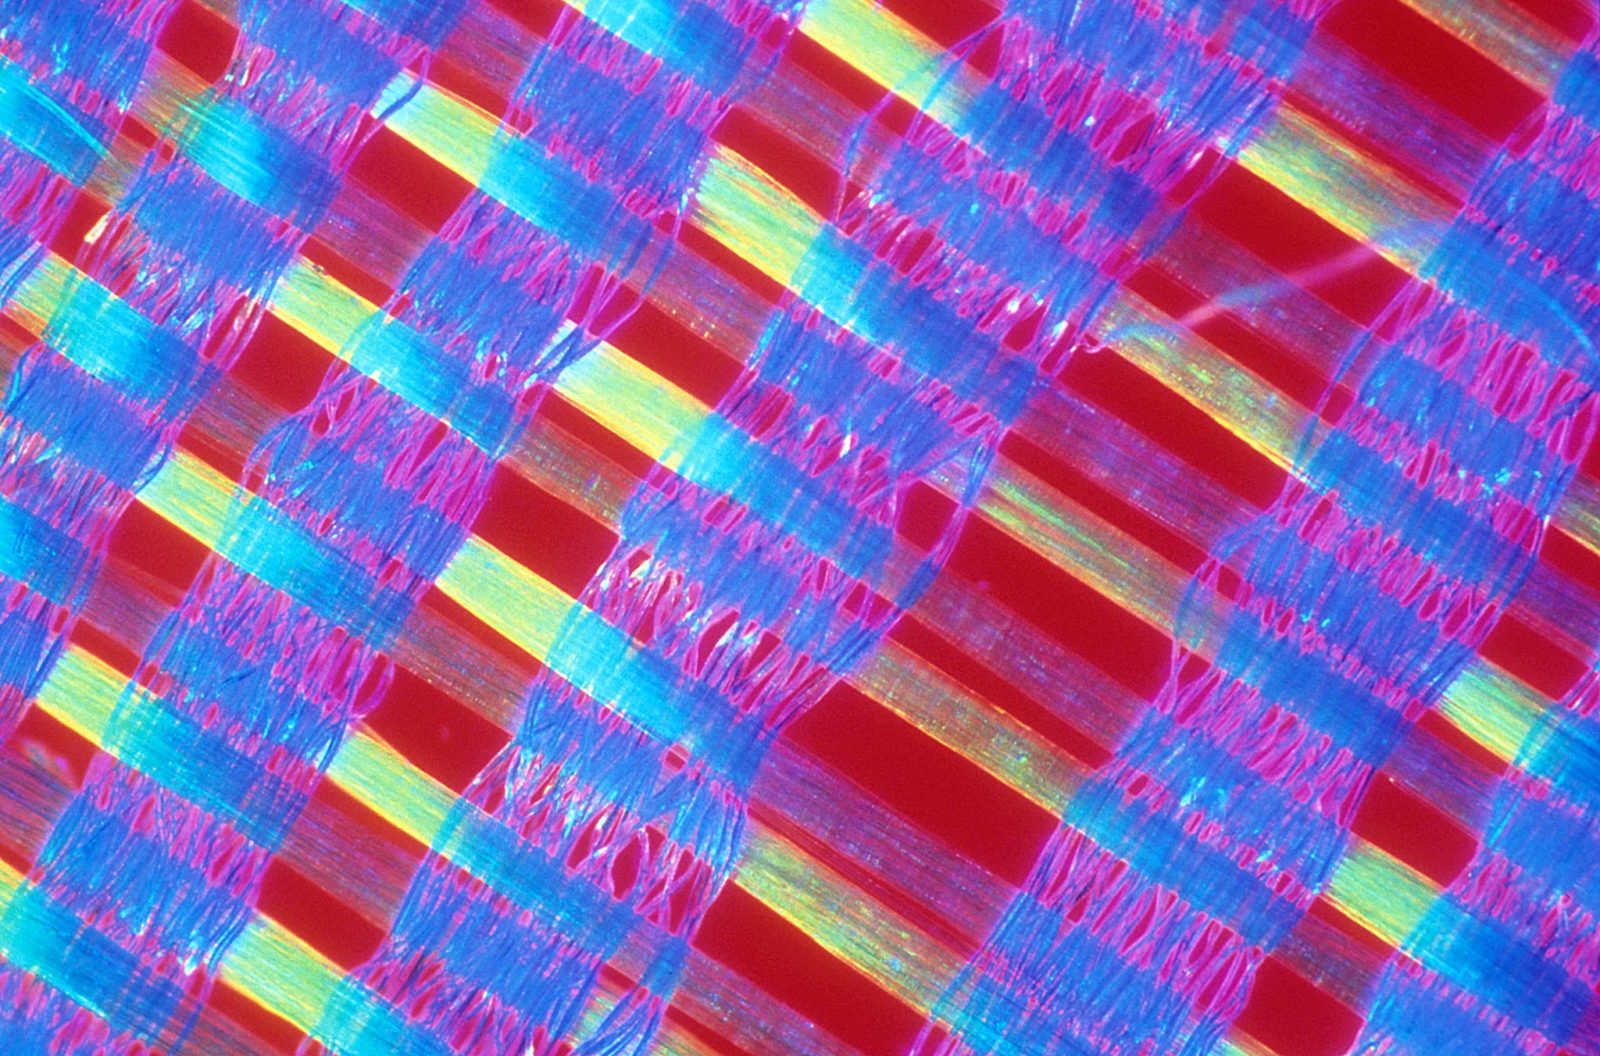 Synthetic woven fabric | 1992 Photomicrography Competition | Nikon’s ...